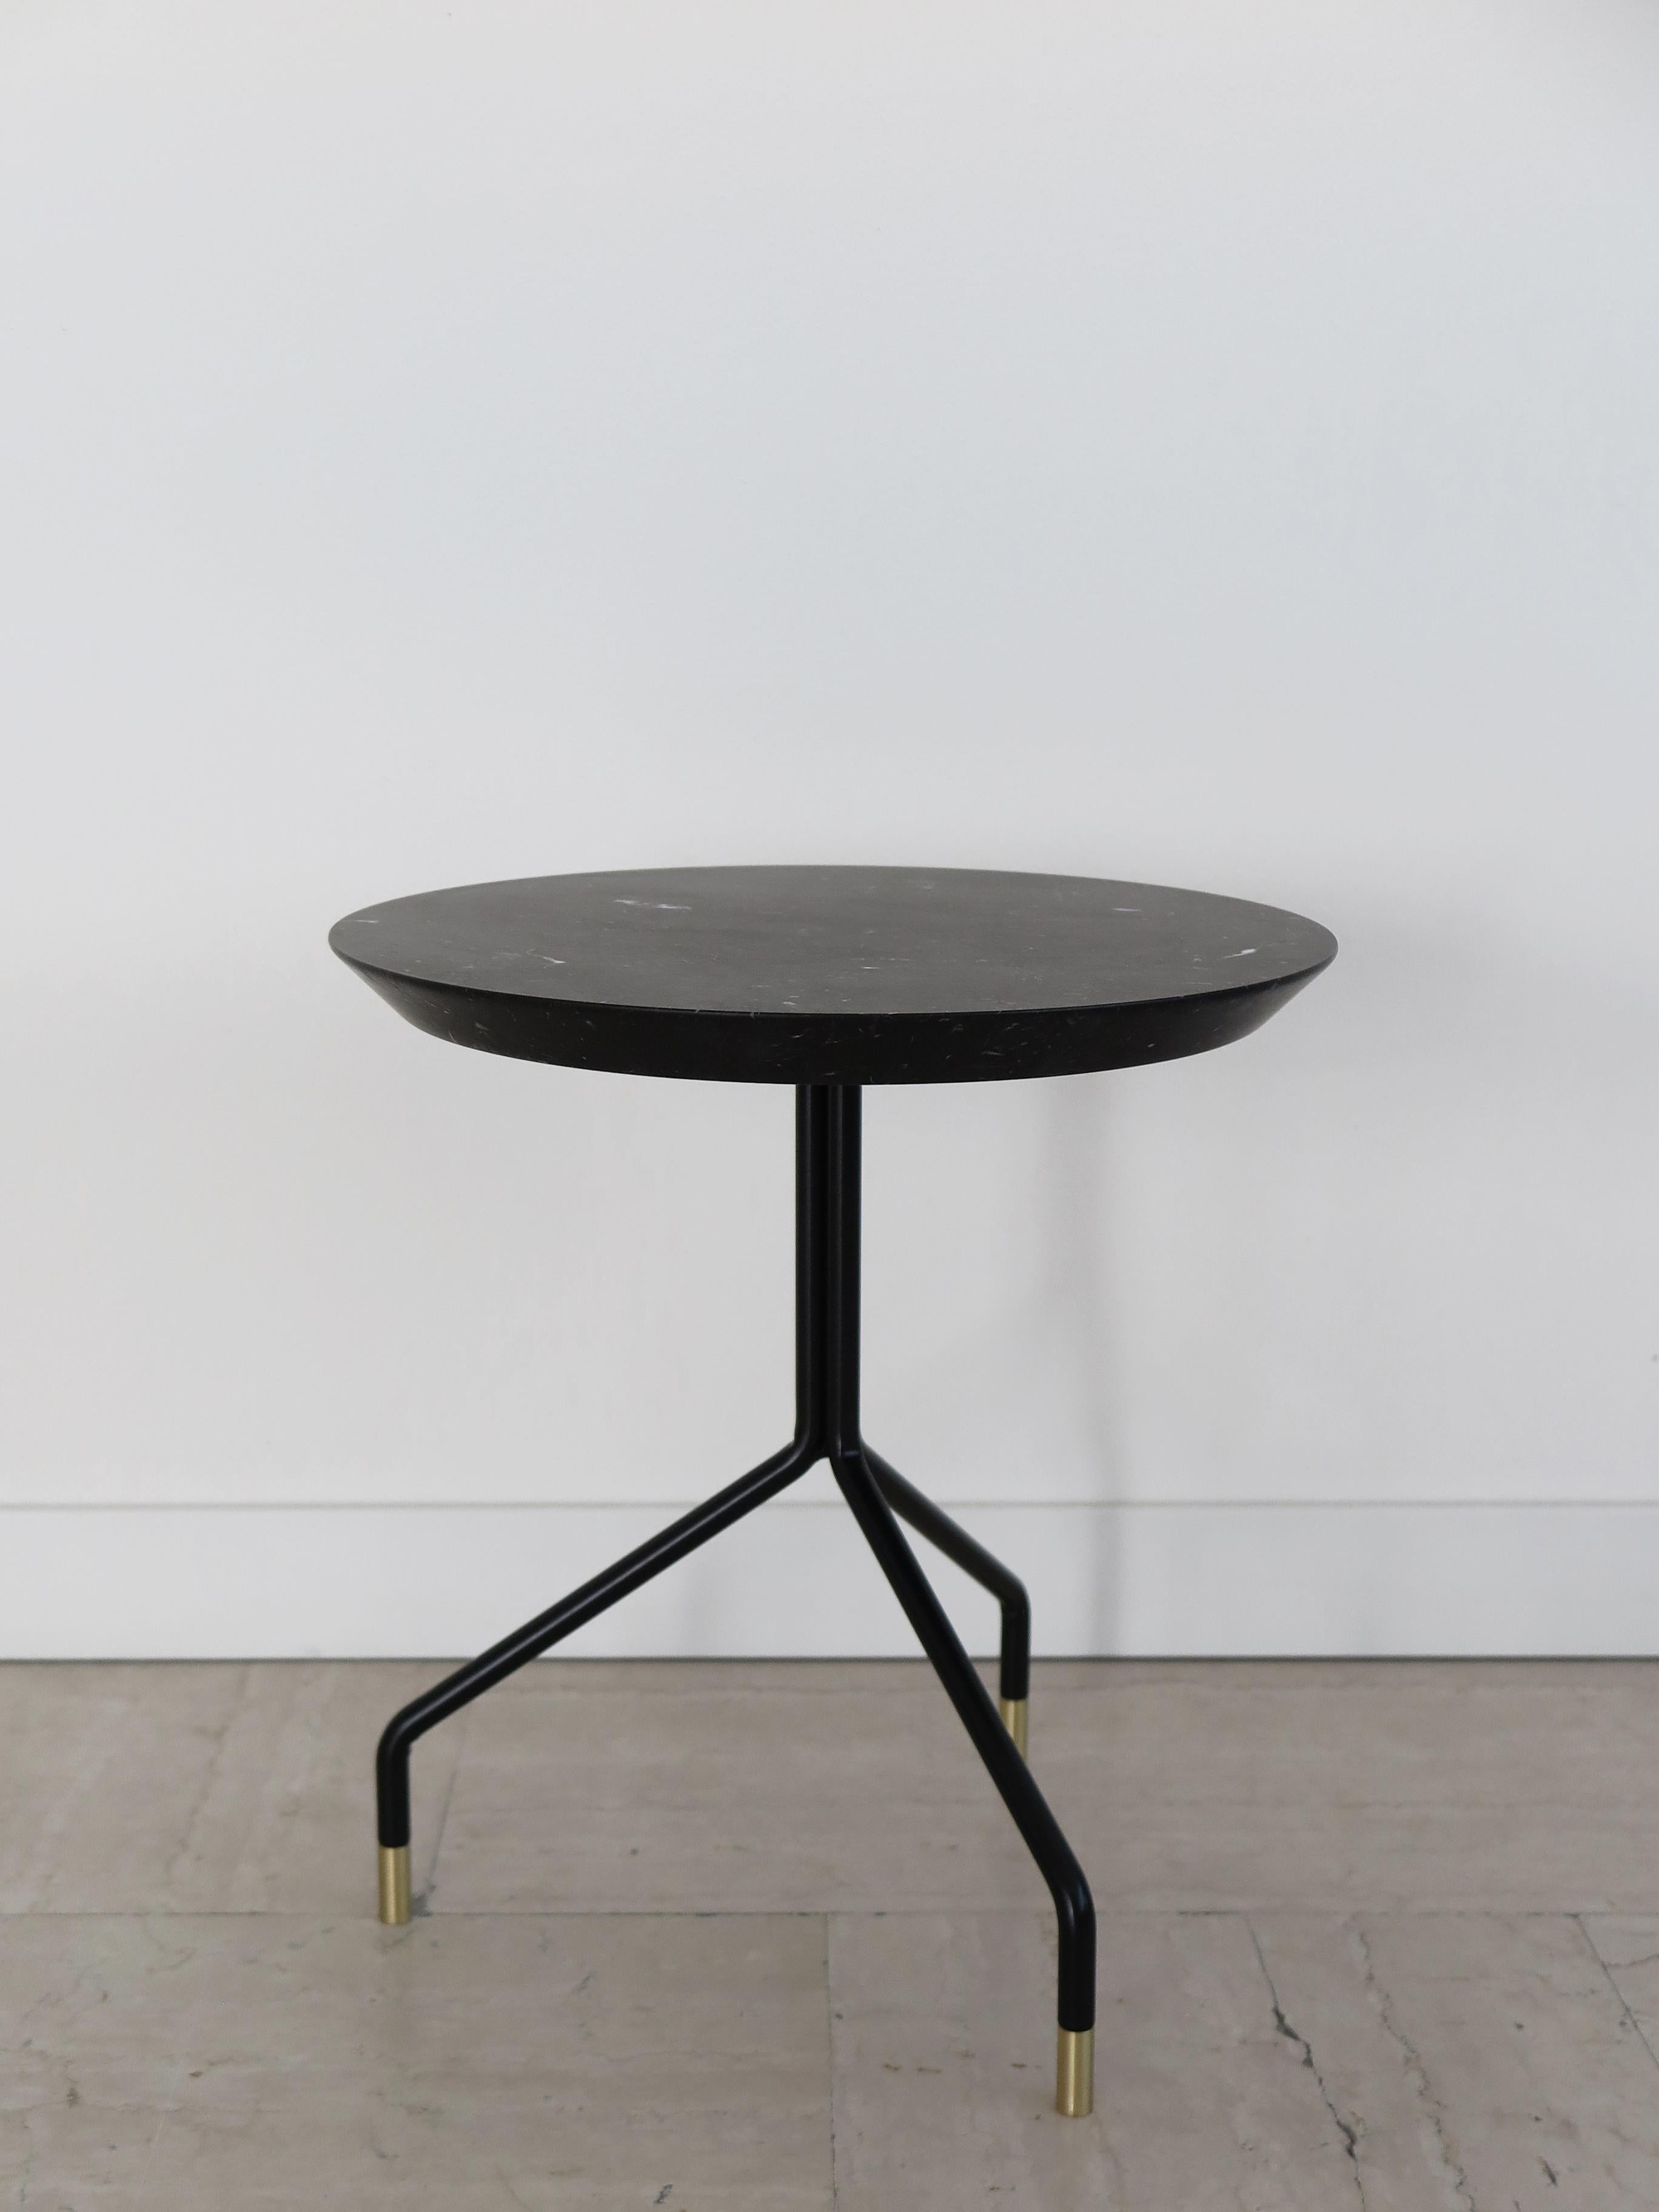 Italian contemporary round coffee table with matt Black Marquinia Marble top and black painted metal structure with brass terminals, new design Capperidicasa, limited edition.

Dimensions: diameter 40 cm - height 43 cm.